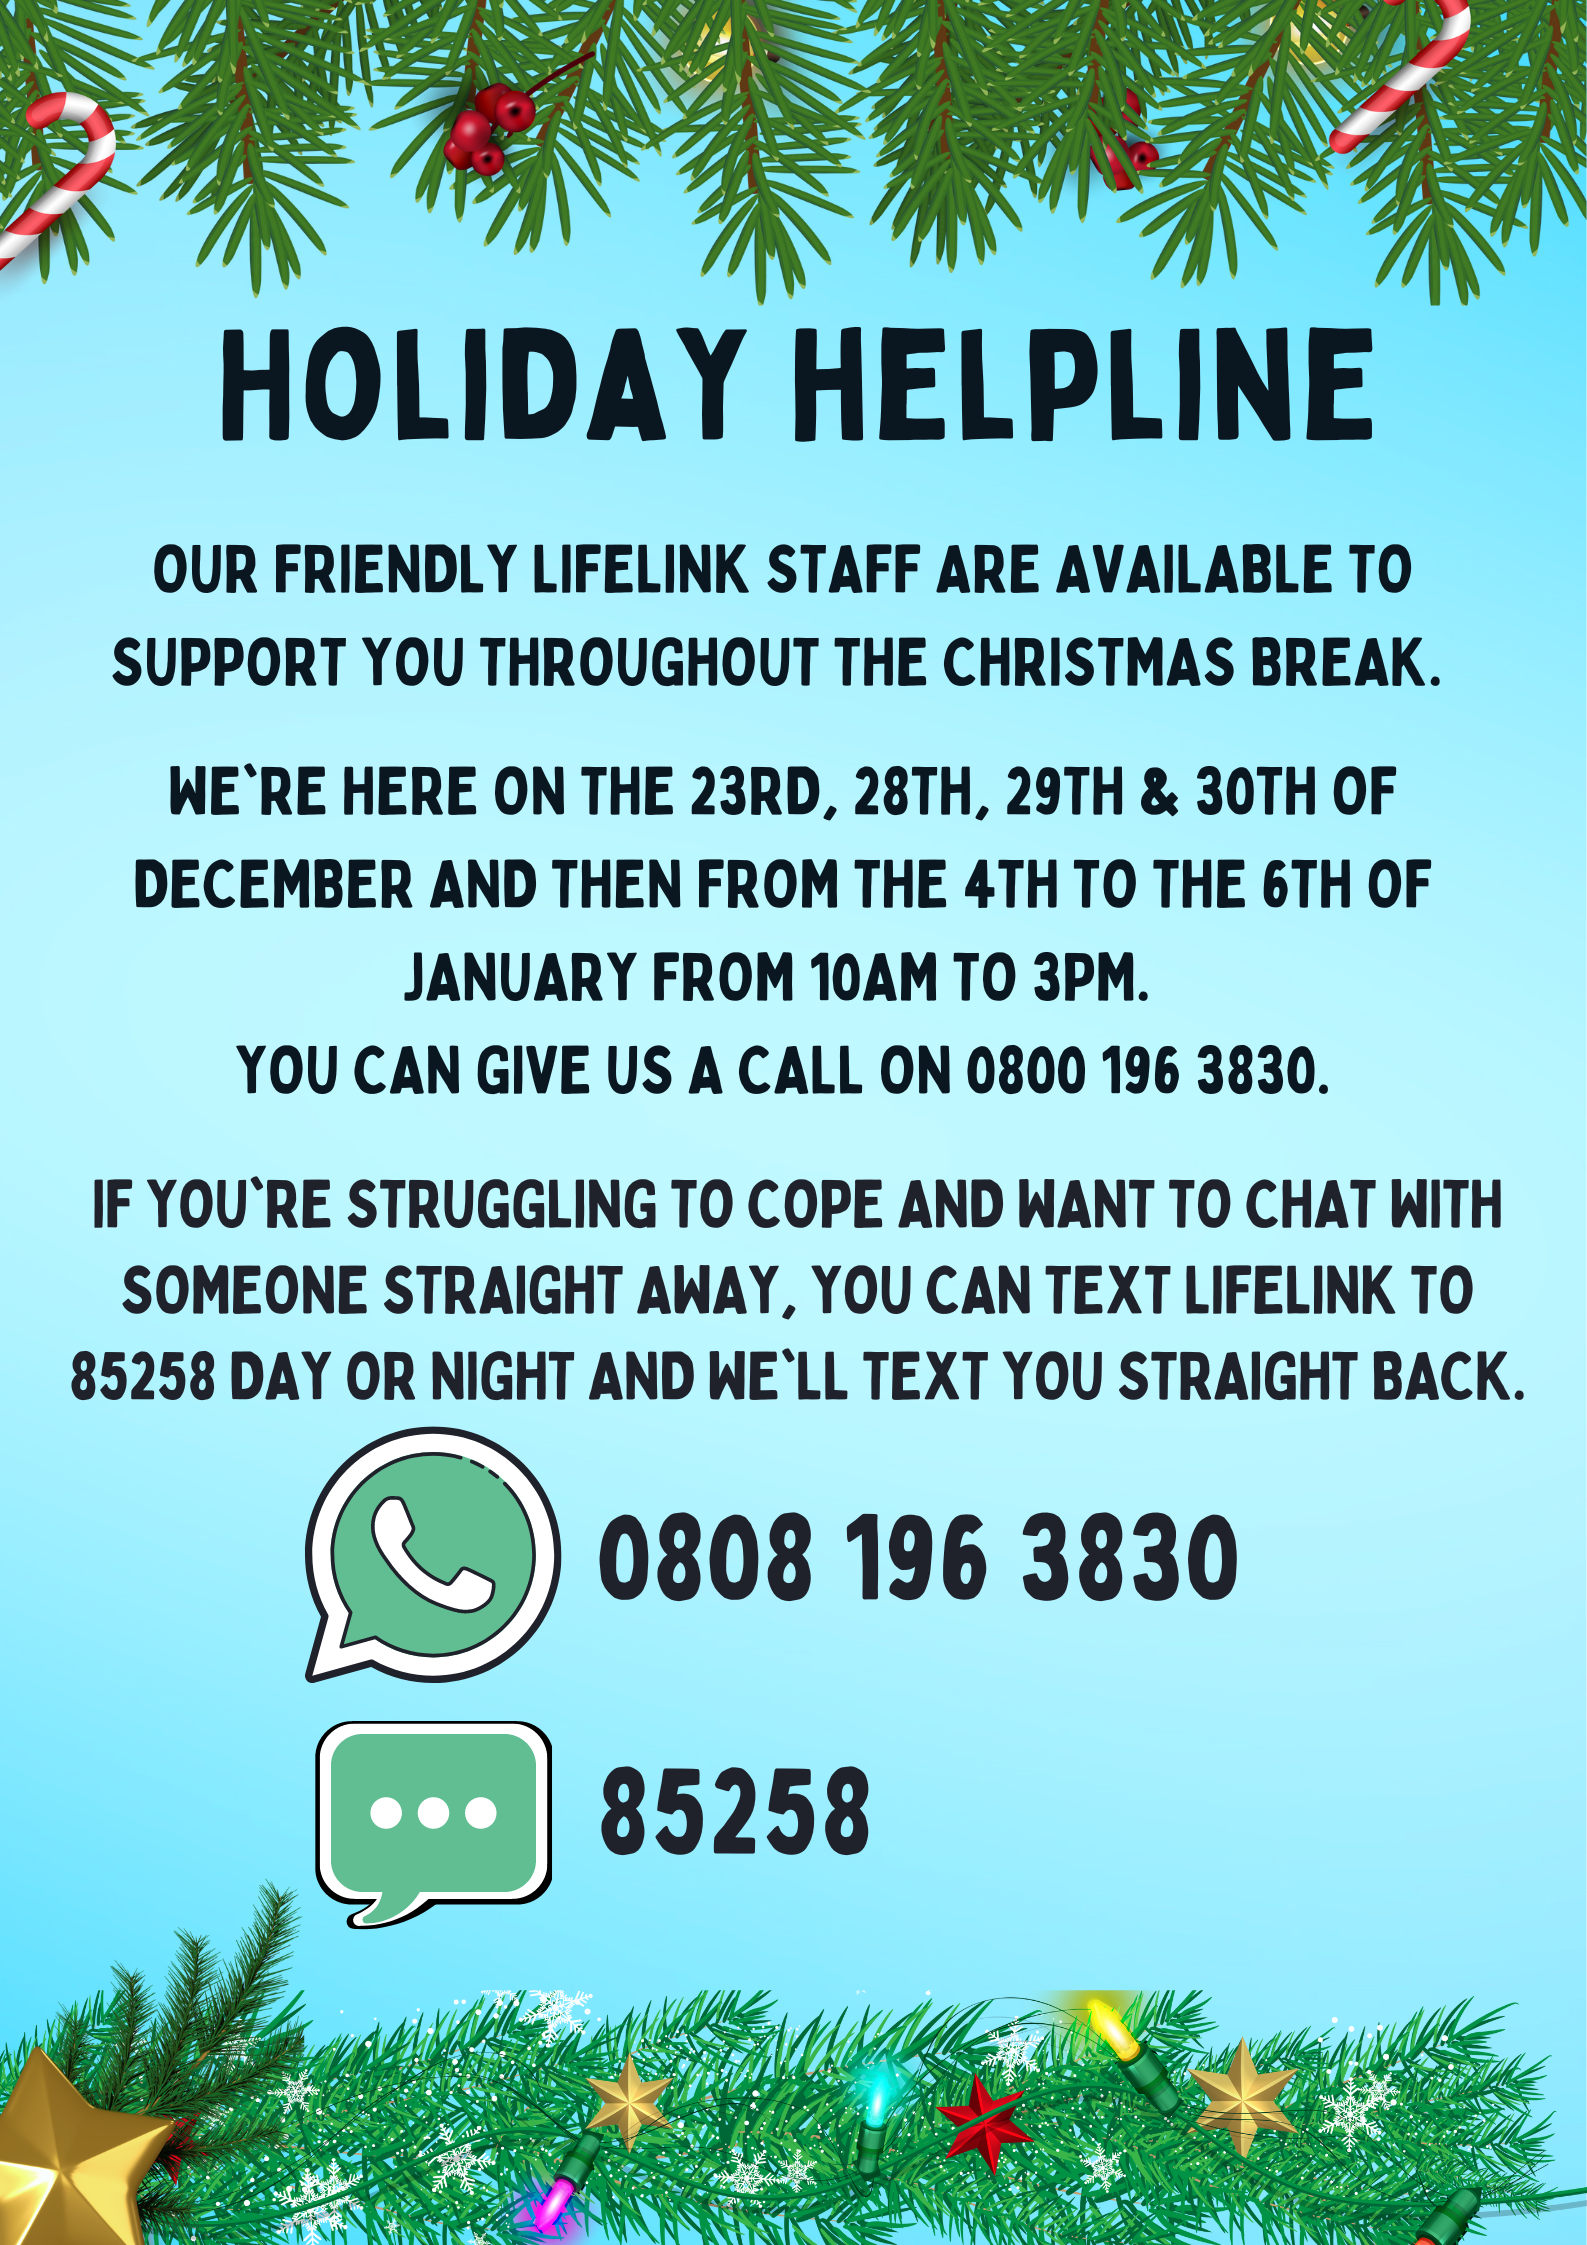 Holiday Helpline - Call 0808 1963830 or Text 85258